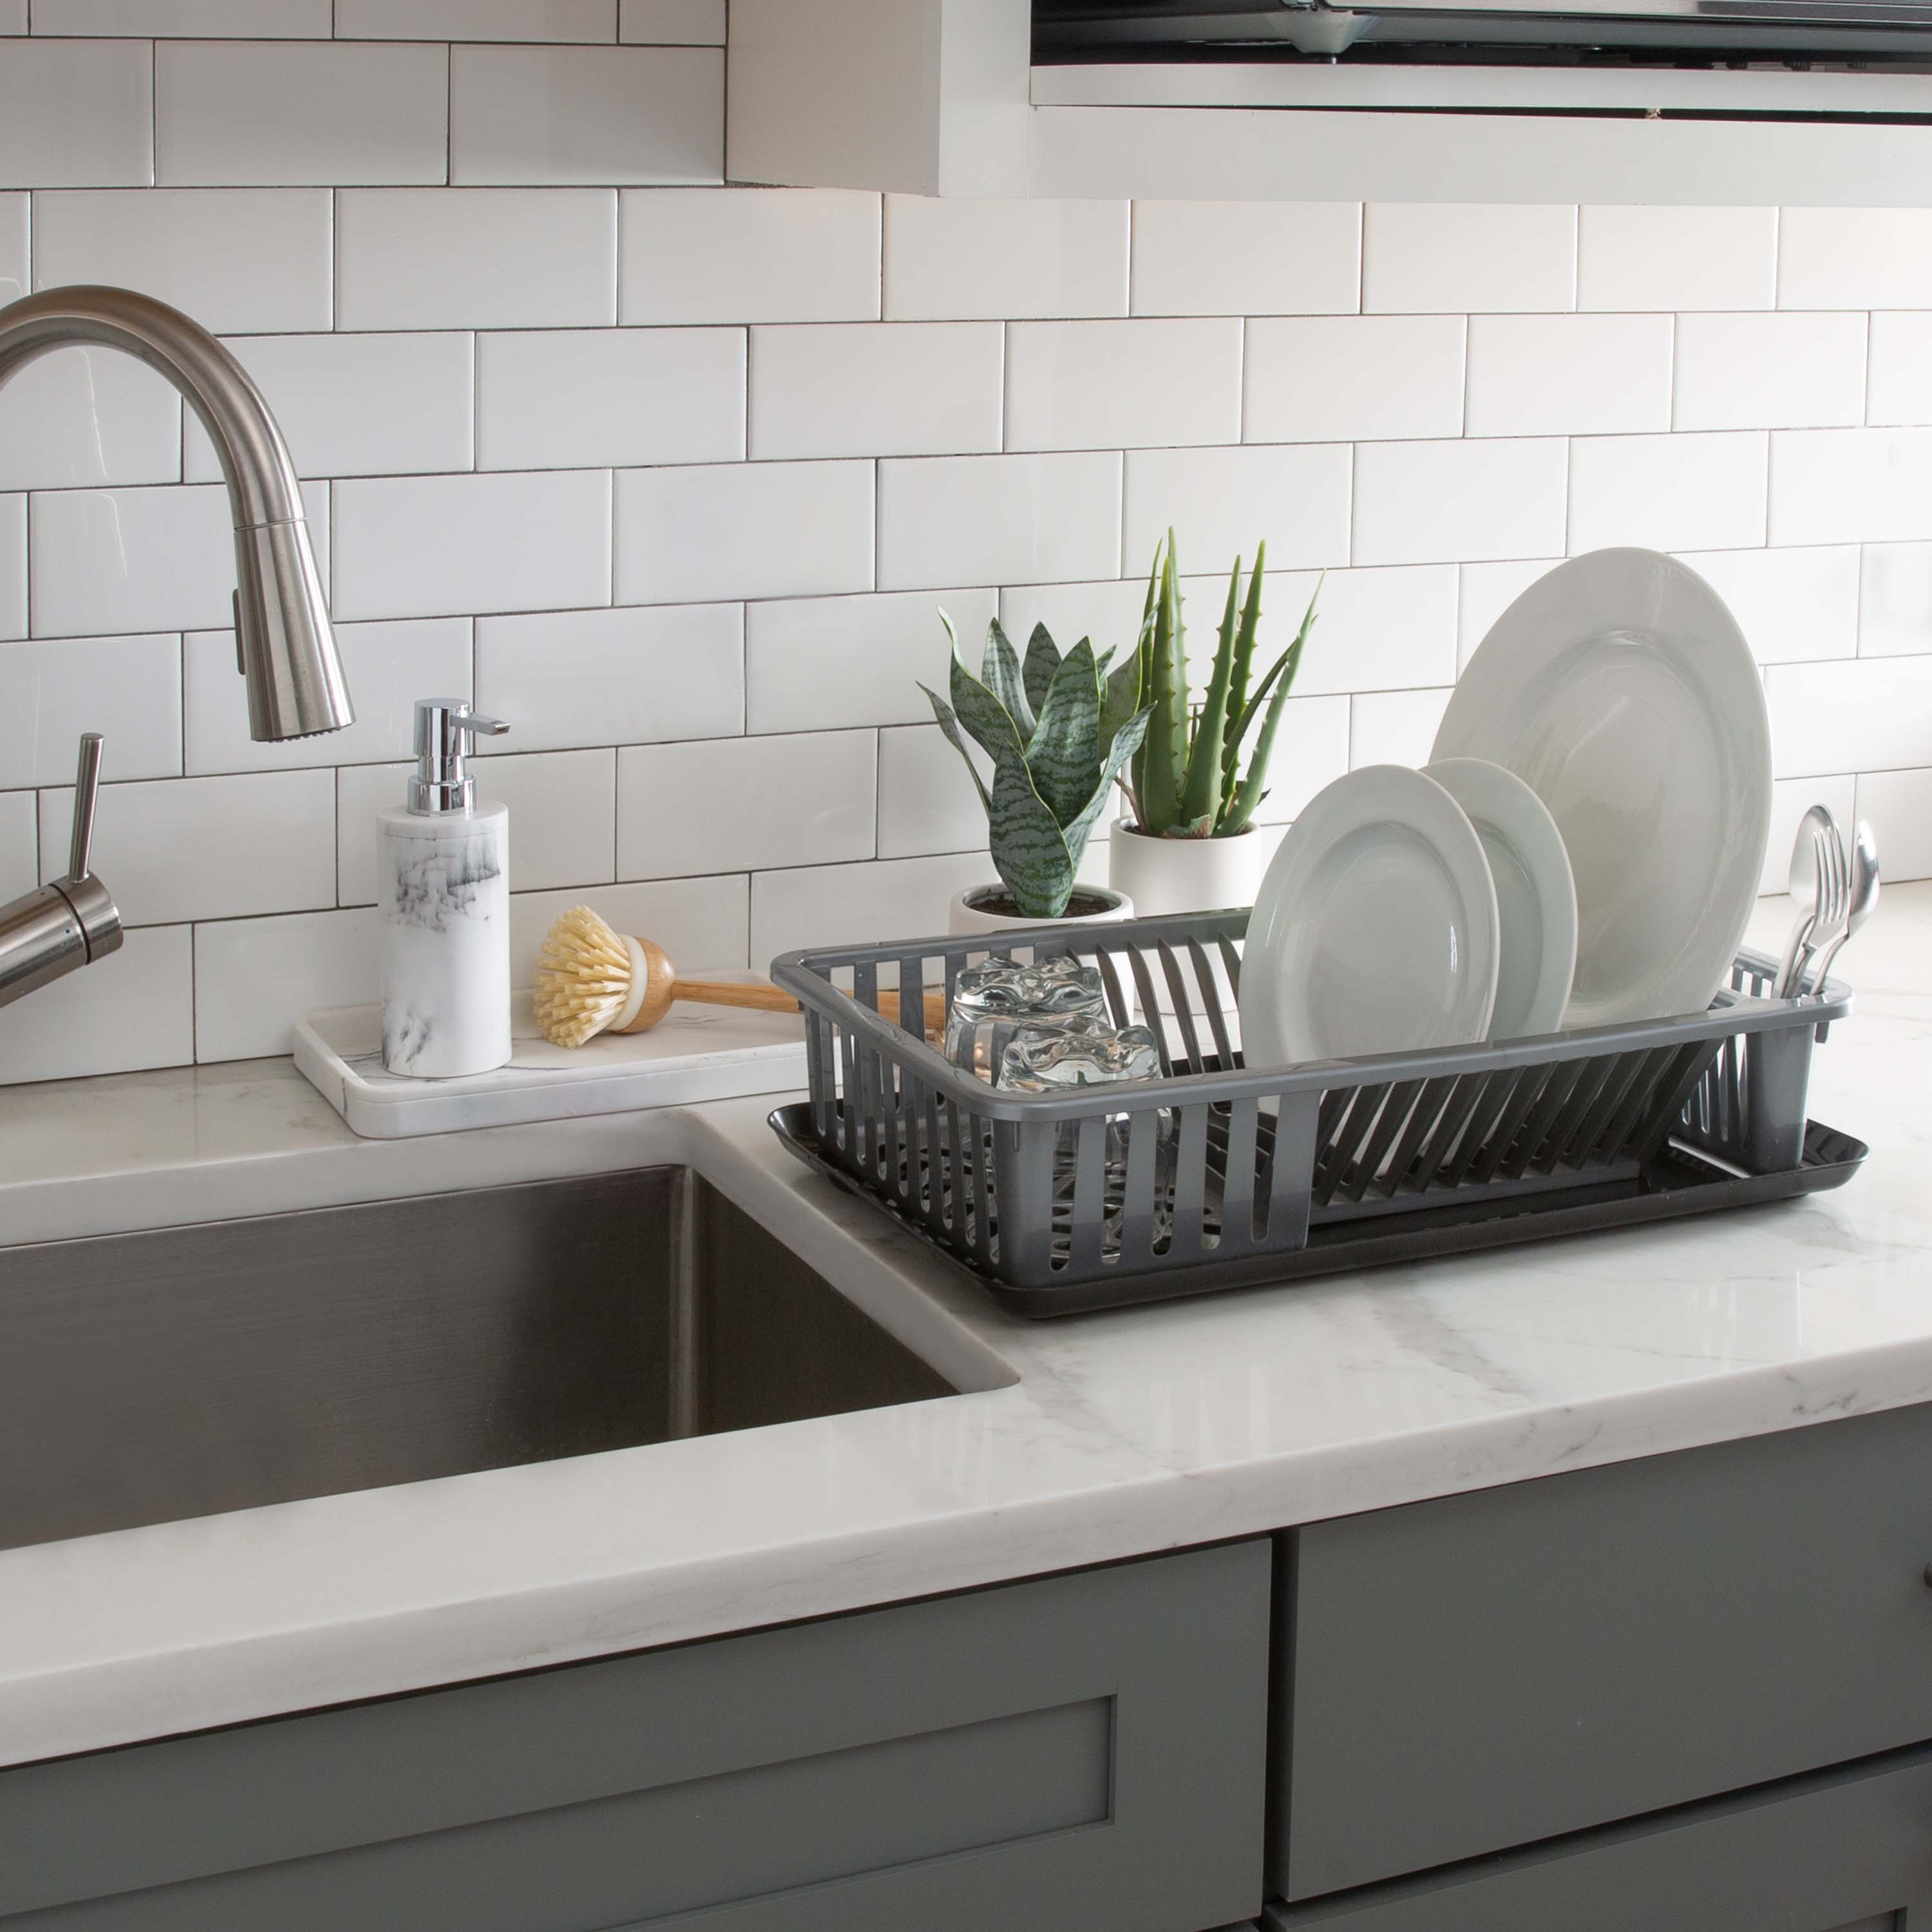 Kitchen Details Over the Sink Dish Rack in White 